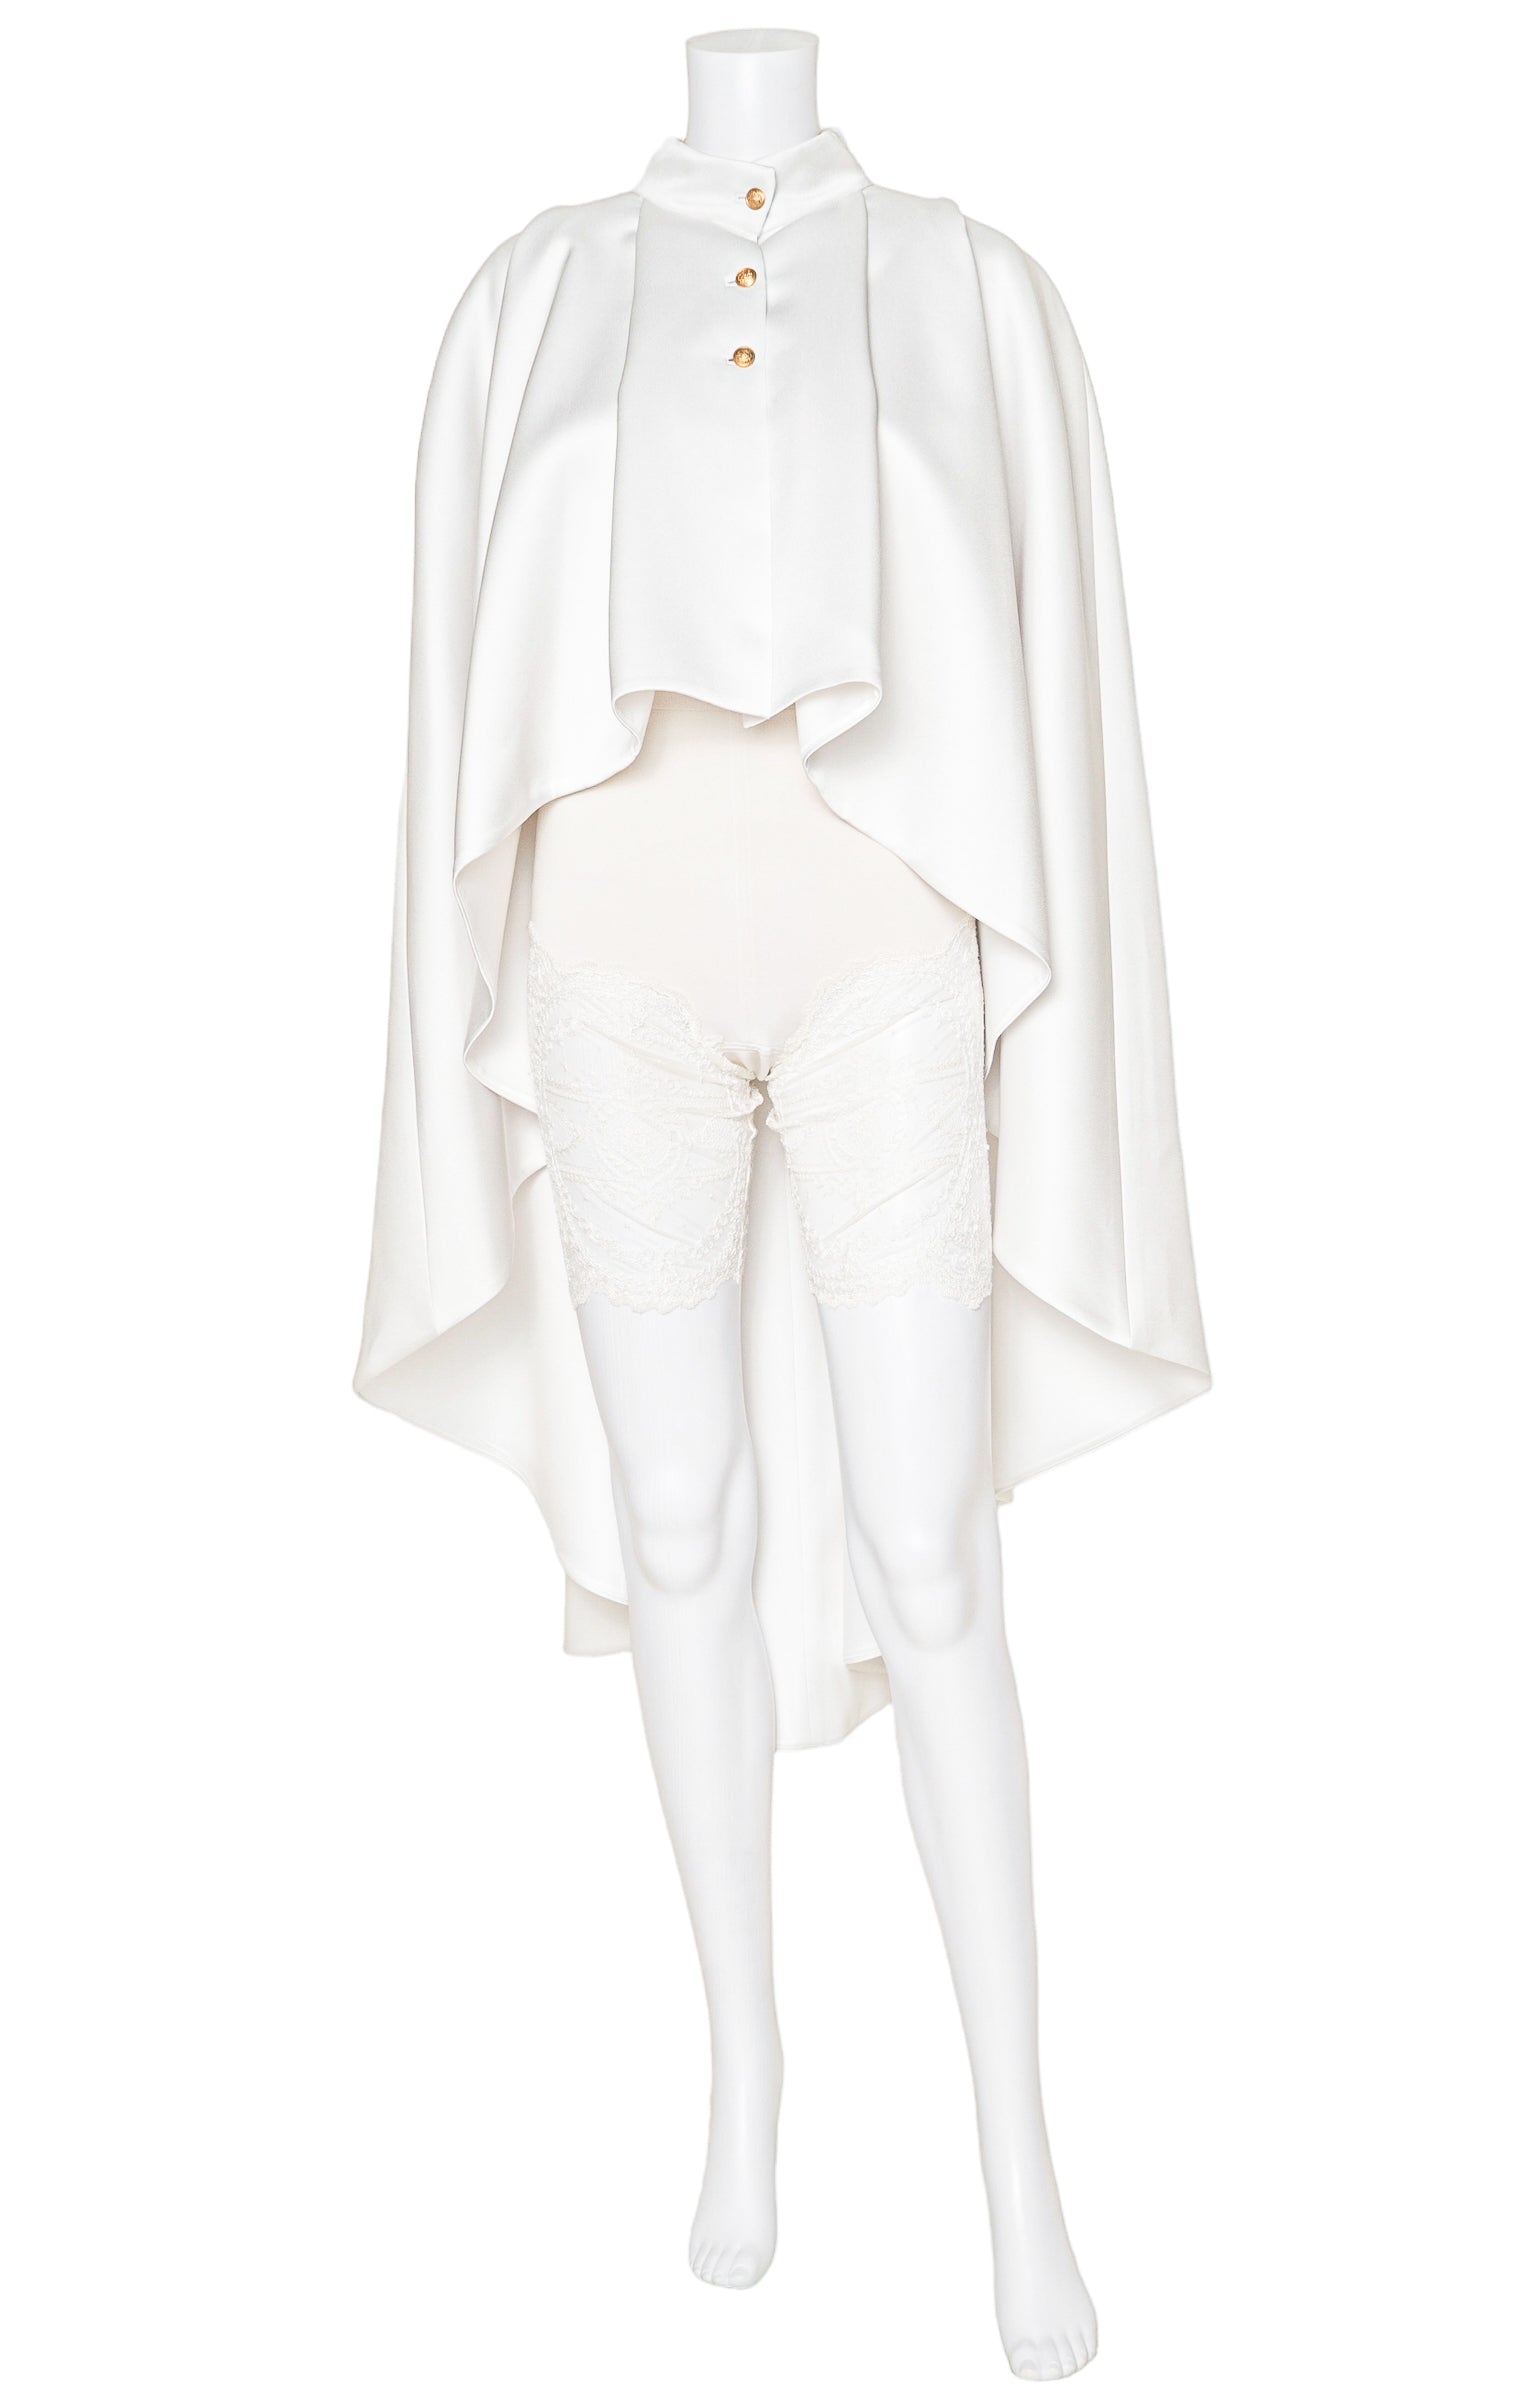 ALICE + OLIVIA (NEW) with tags Jacket / Cape Size: M/L ...